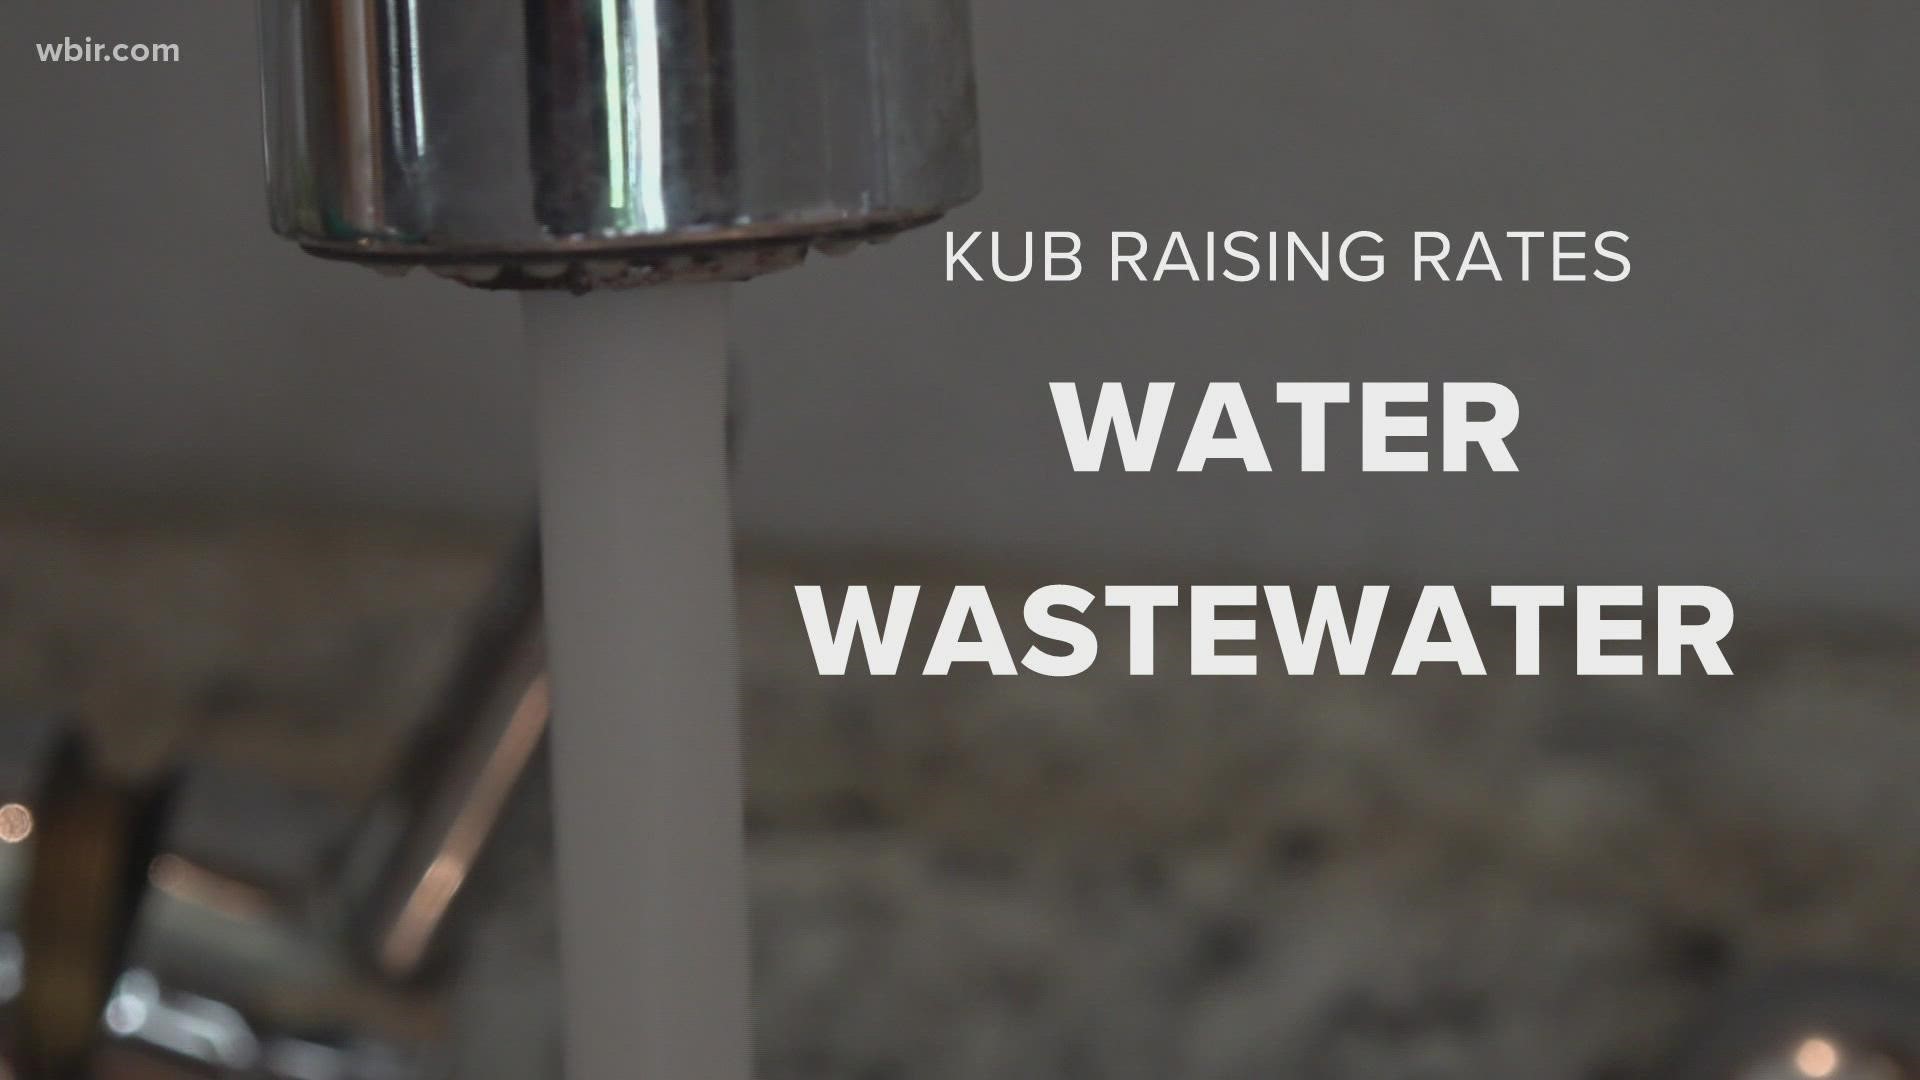 KUB plans to raise rates for water by 5% and wastewater by 4% over the next three years.